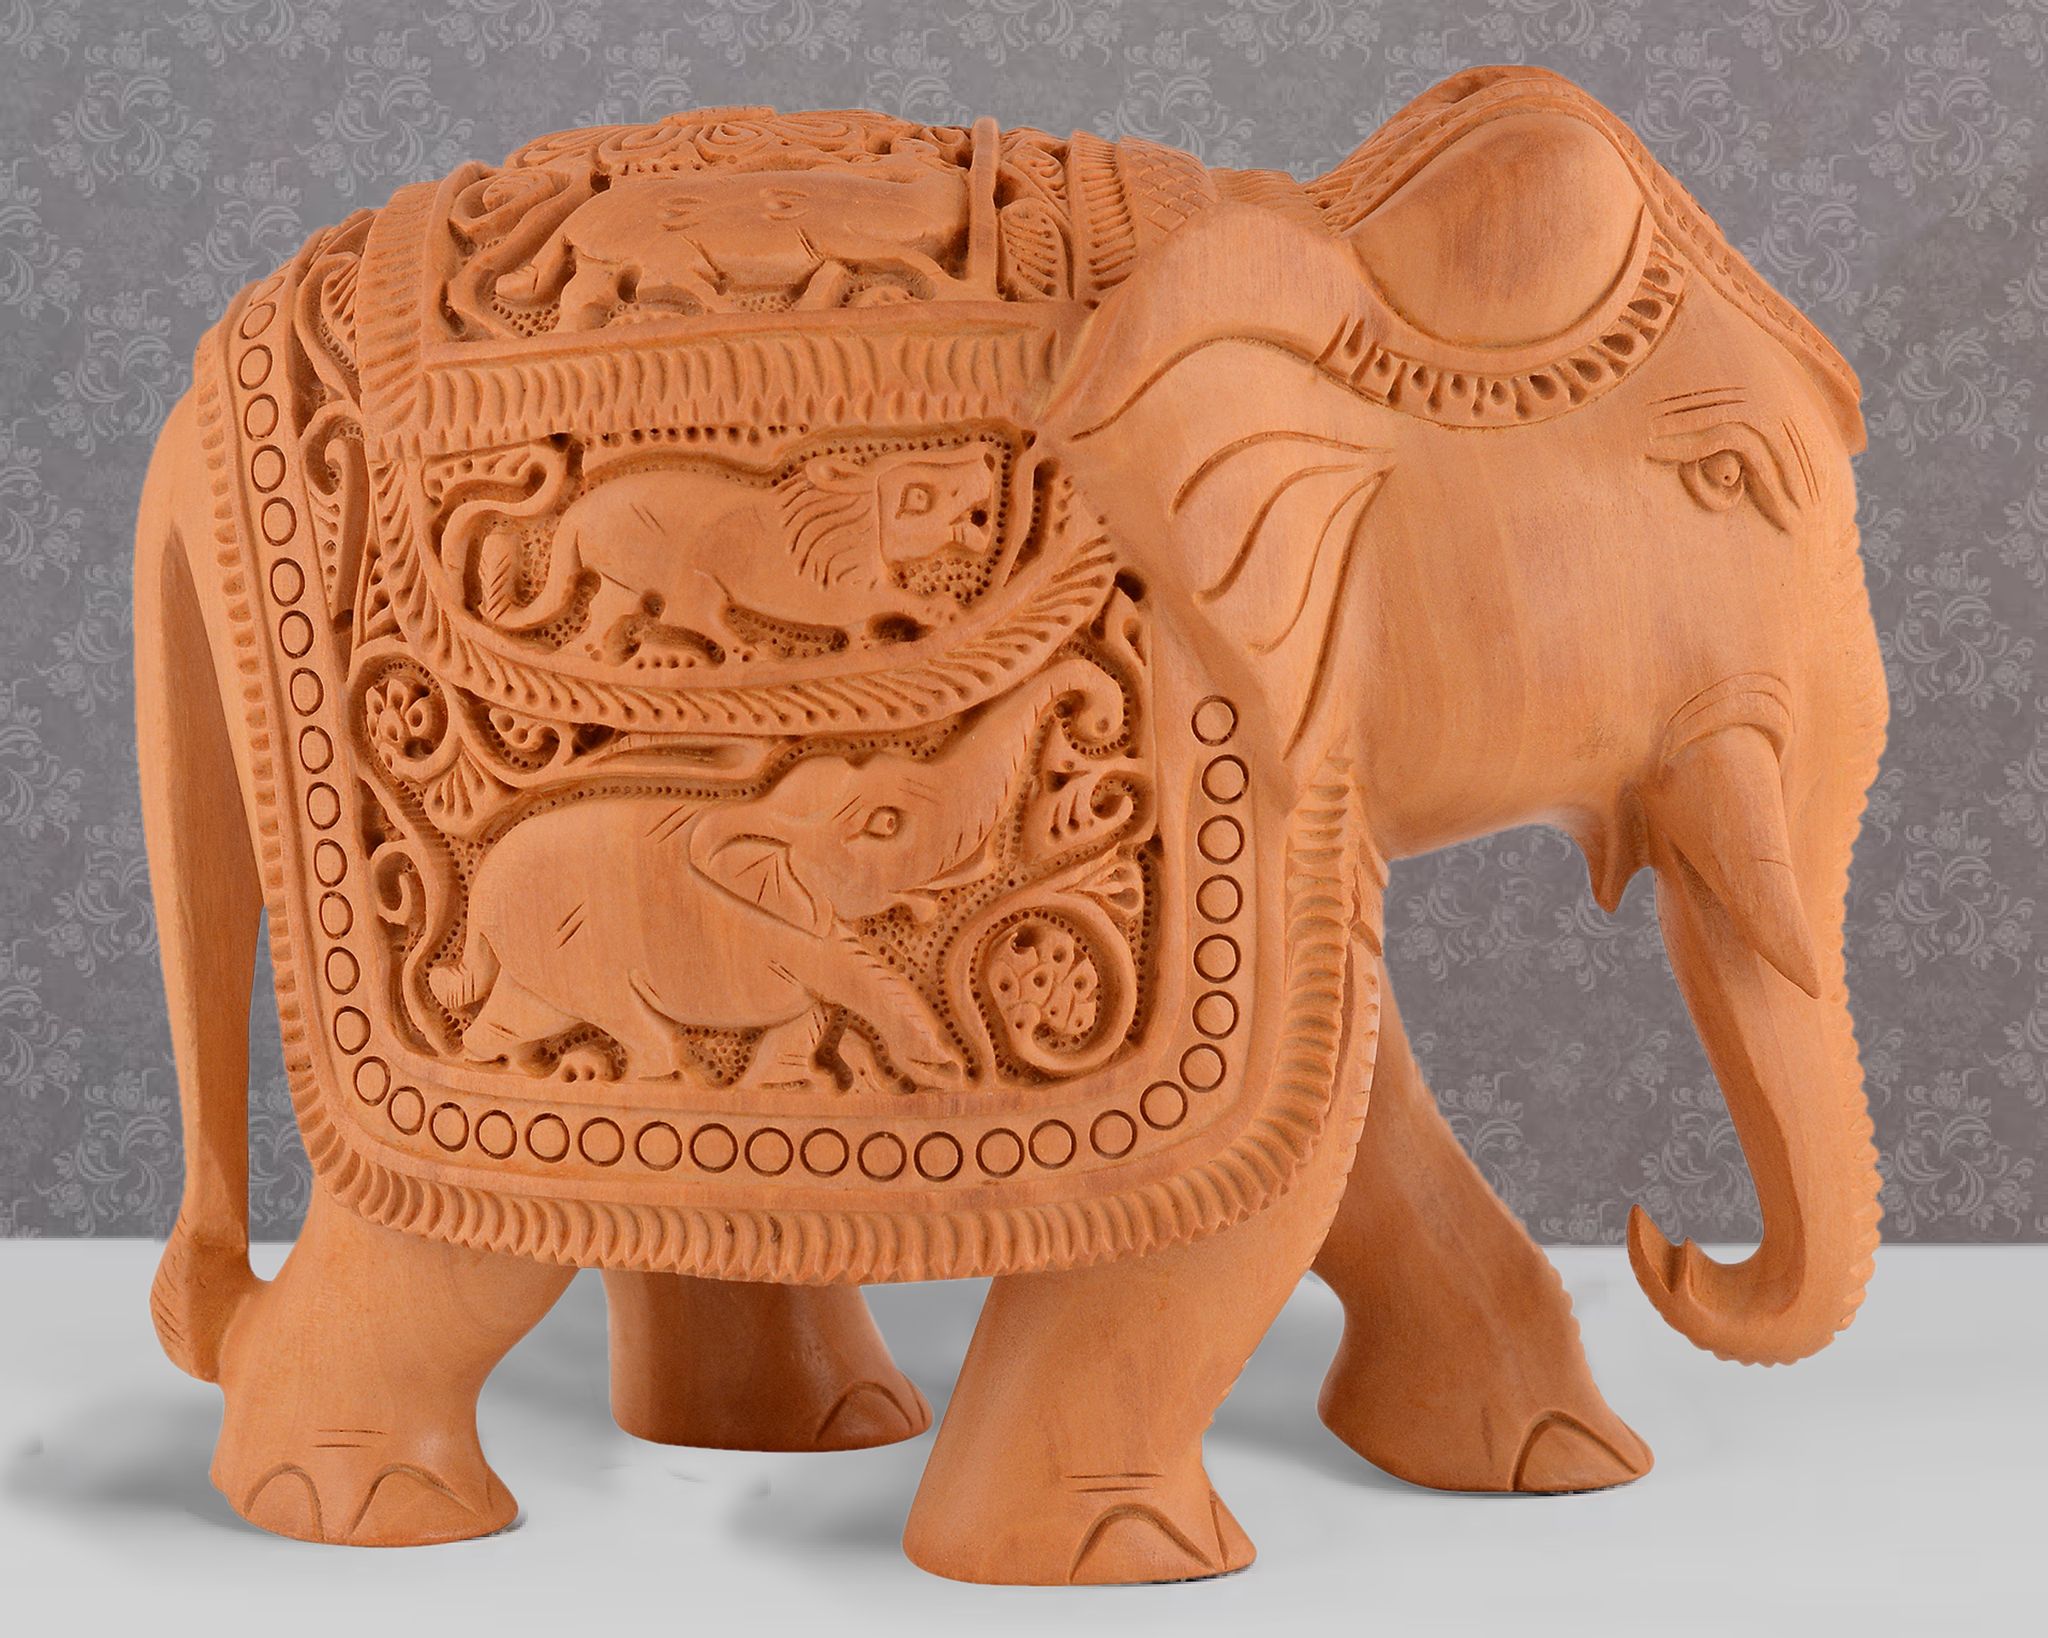 Tribes India Hand Carved Wooden Elephant 6 Inch